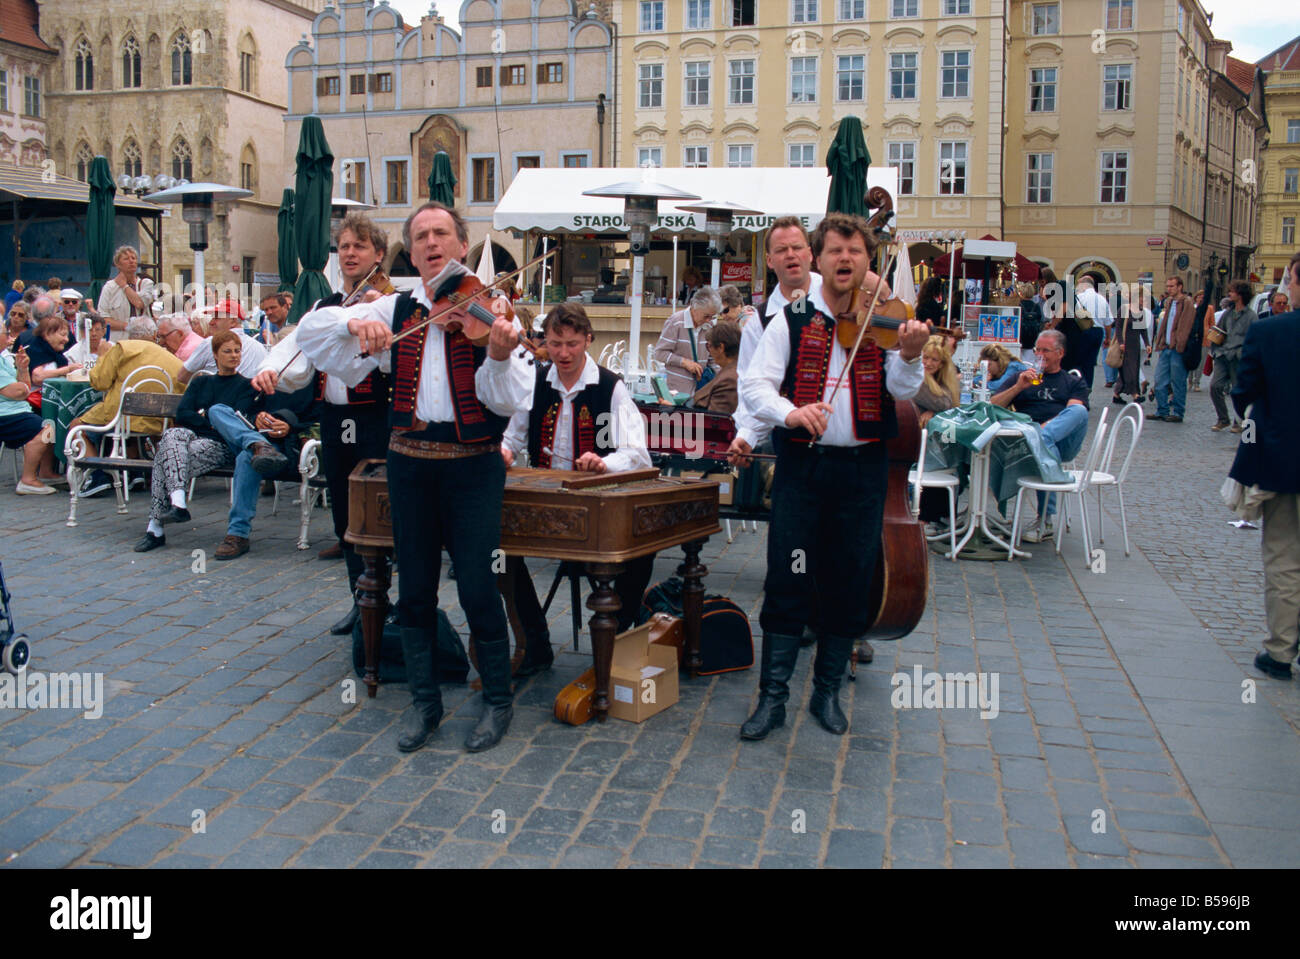 Musicians playing in city square, Prague, Czech Republic, Europe Stock Photo